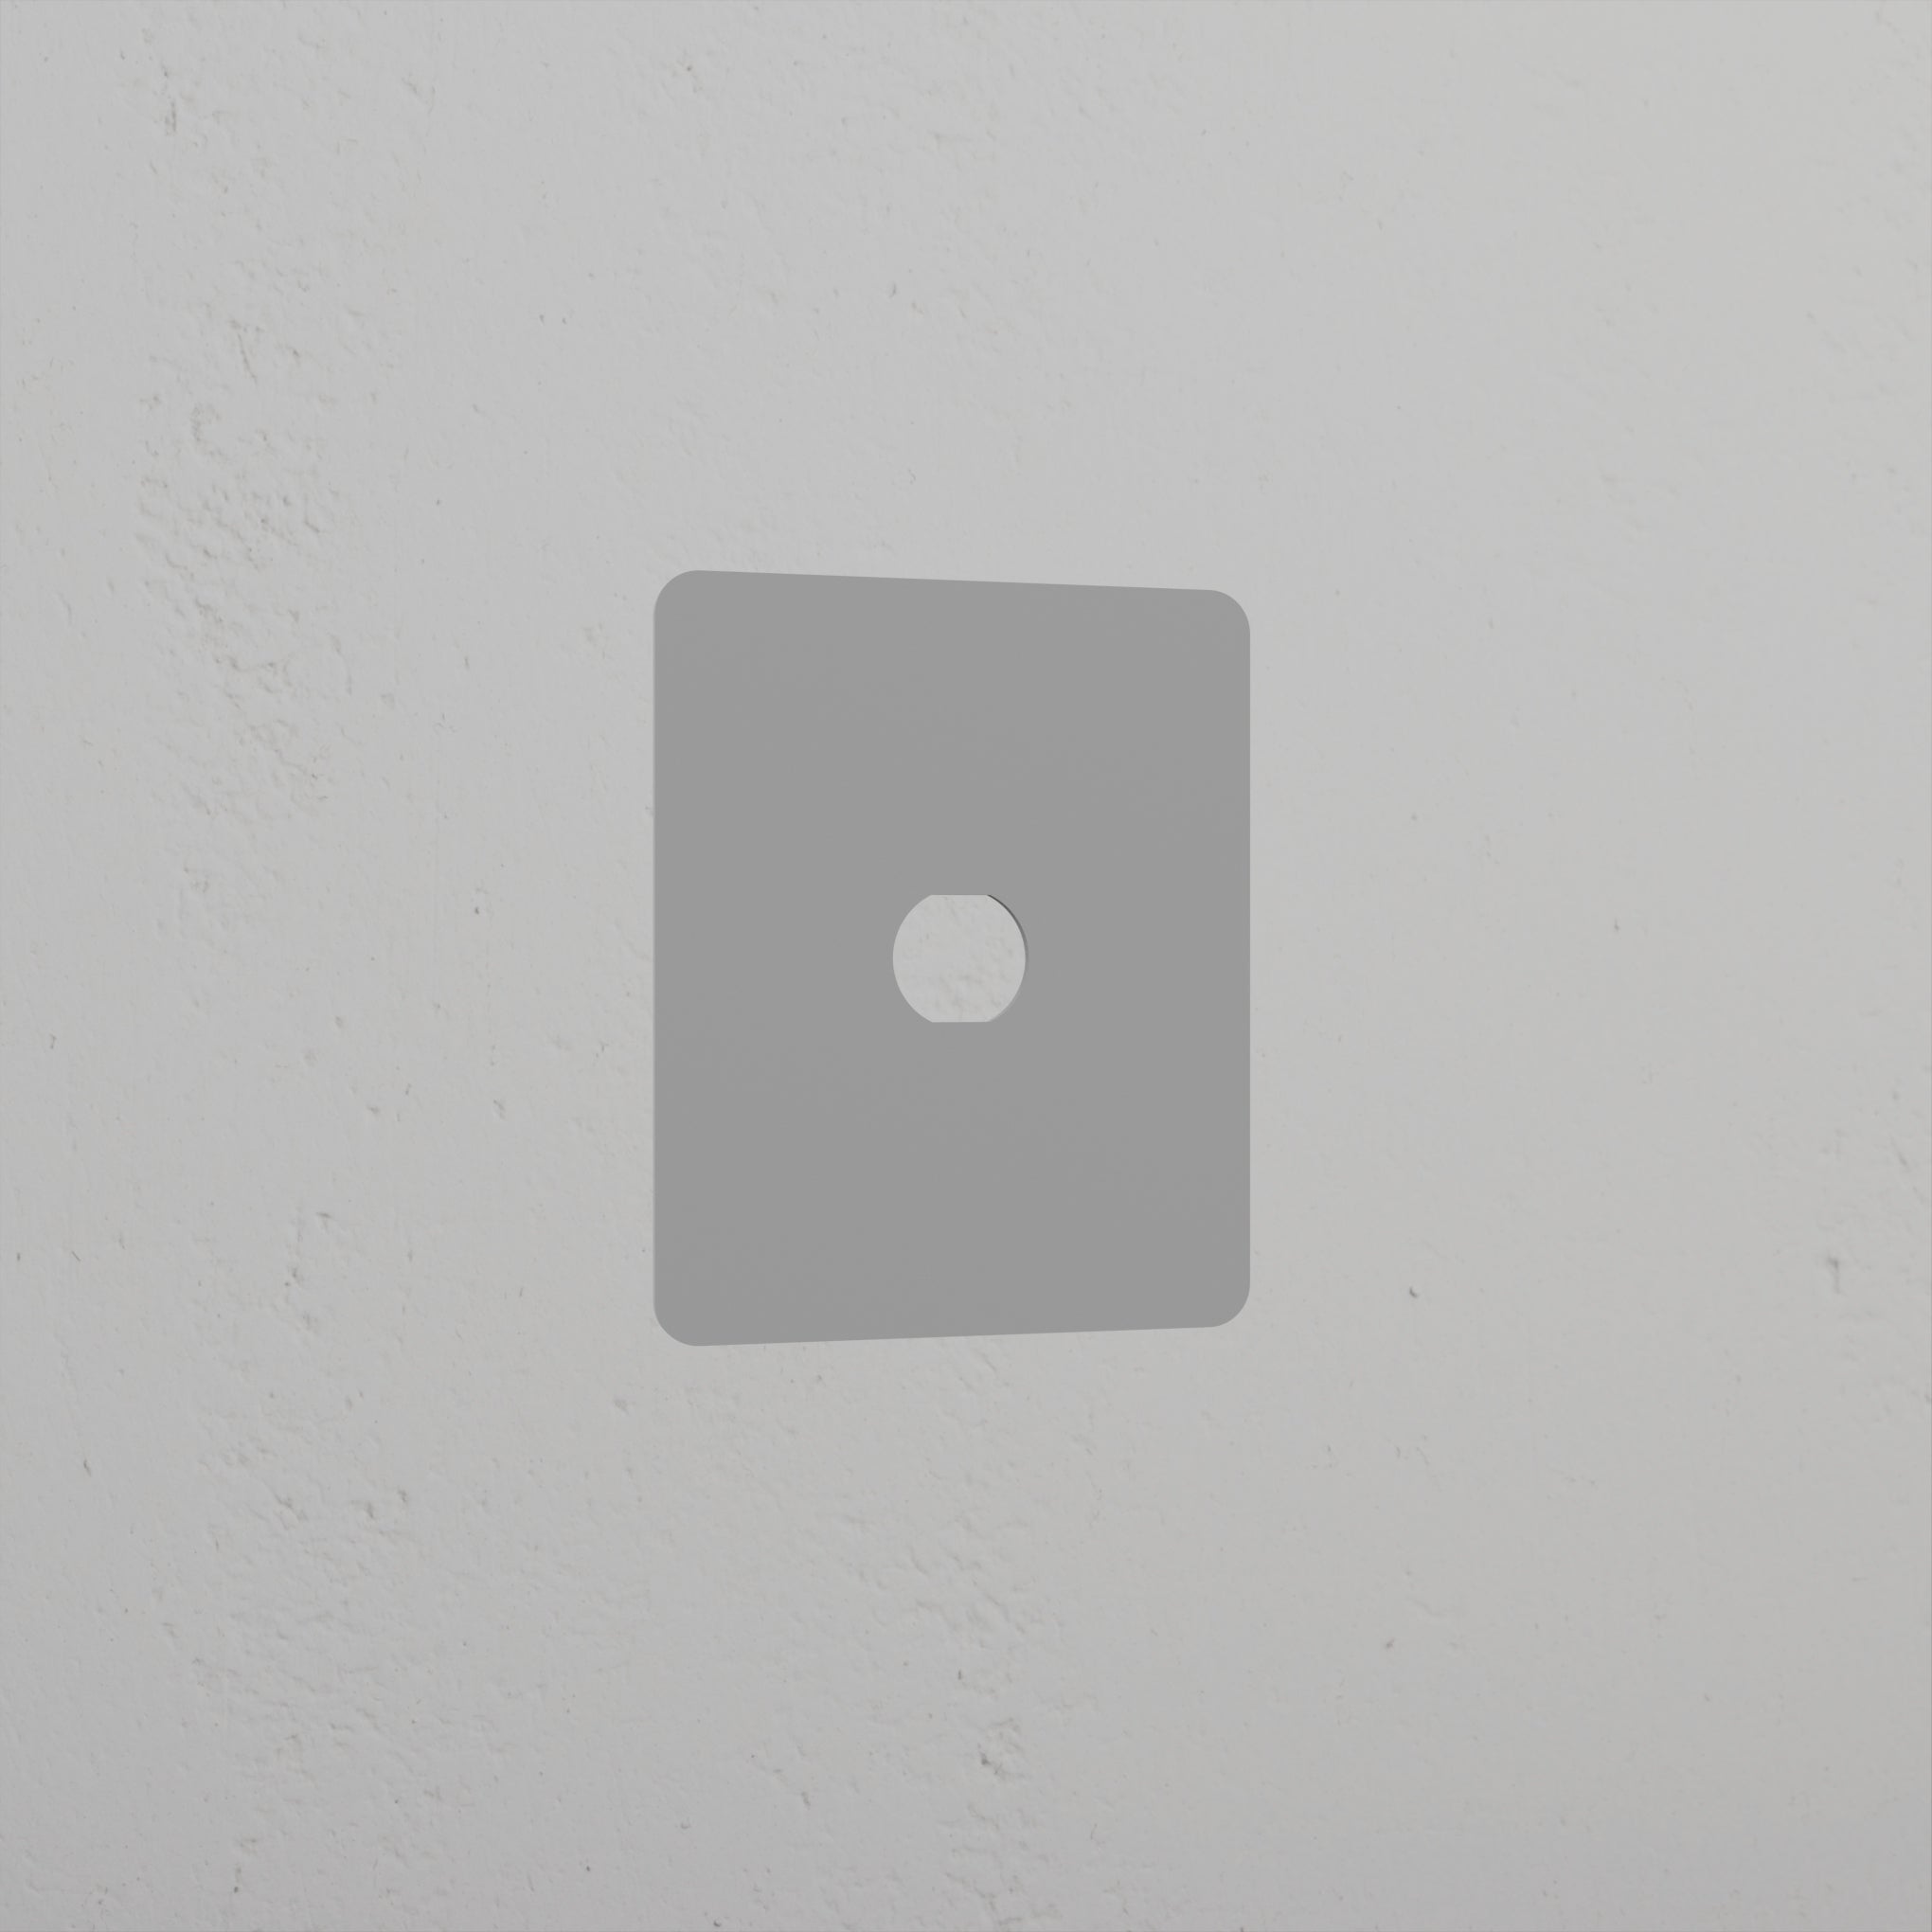 2G Slimline Switch Plate – Paintable